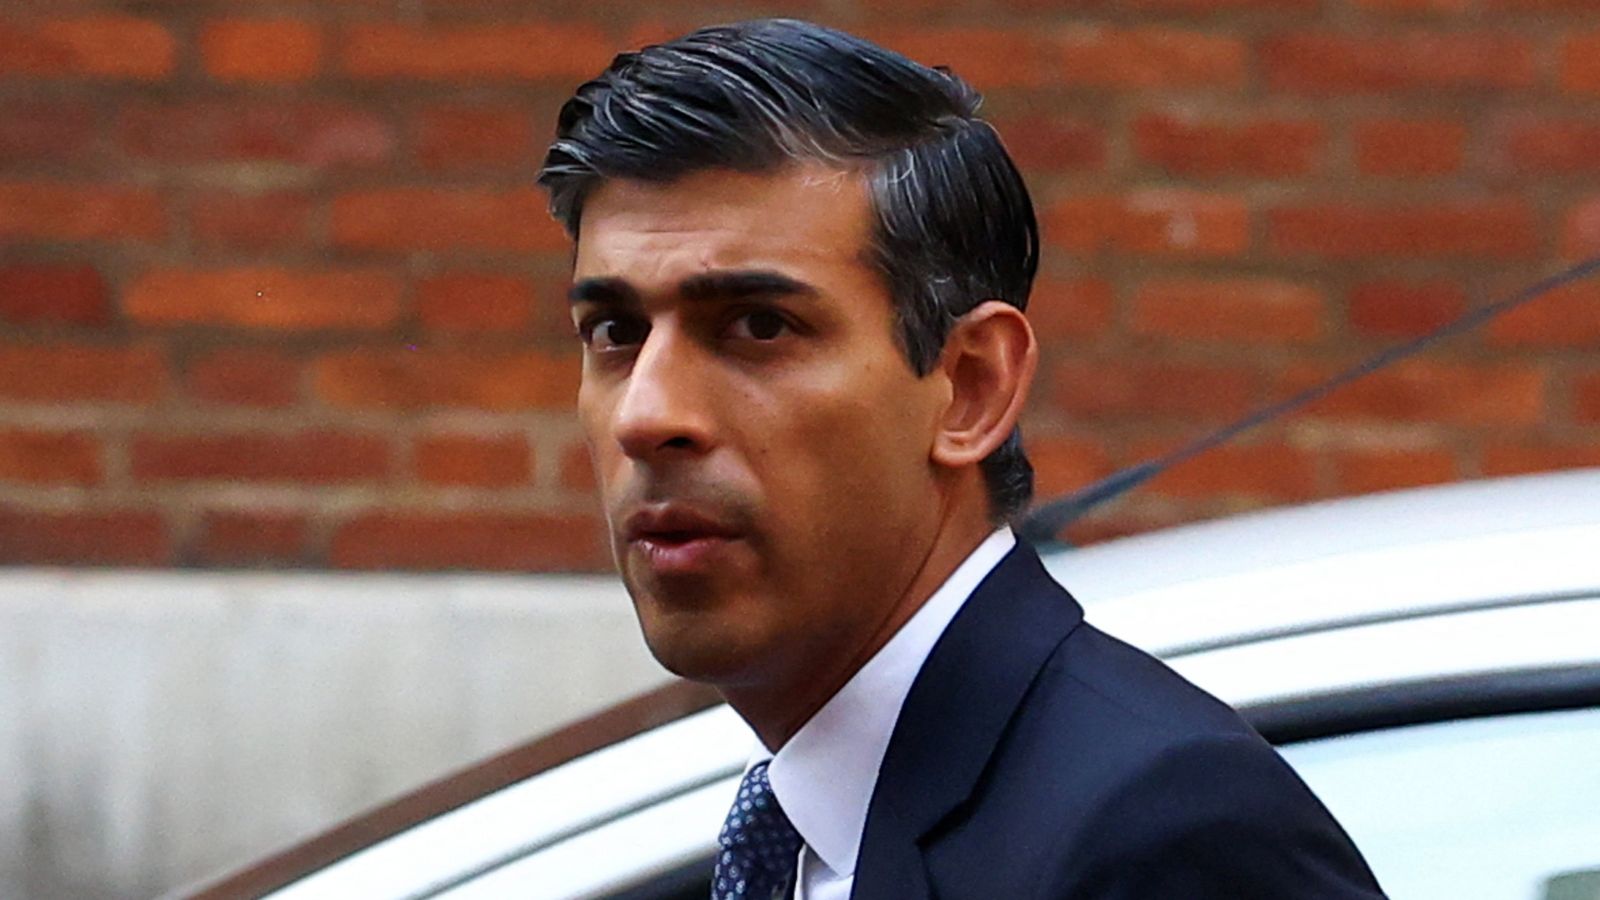 Can Rishi Sunak repair and reunite the Tory party after remarkable political comeback?